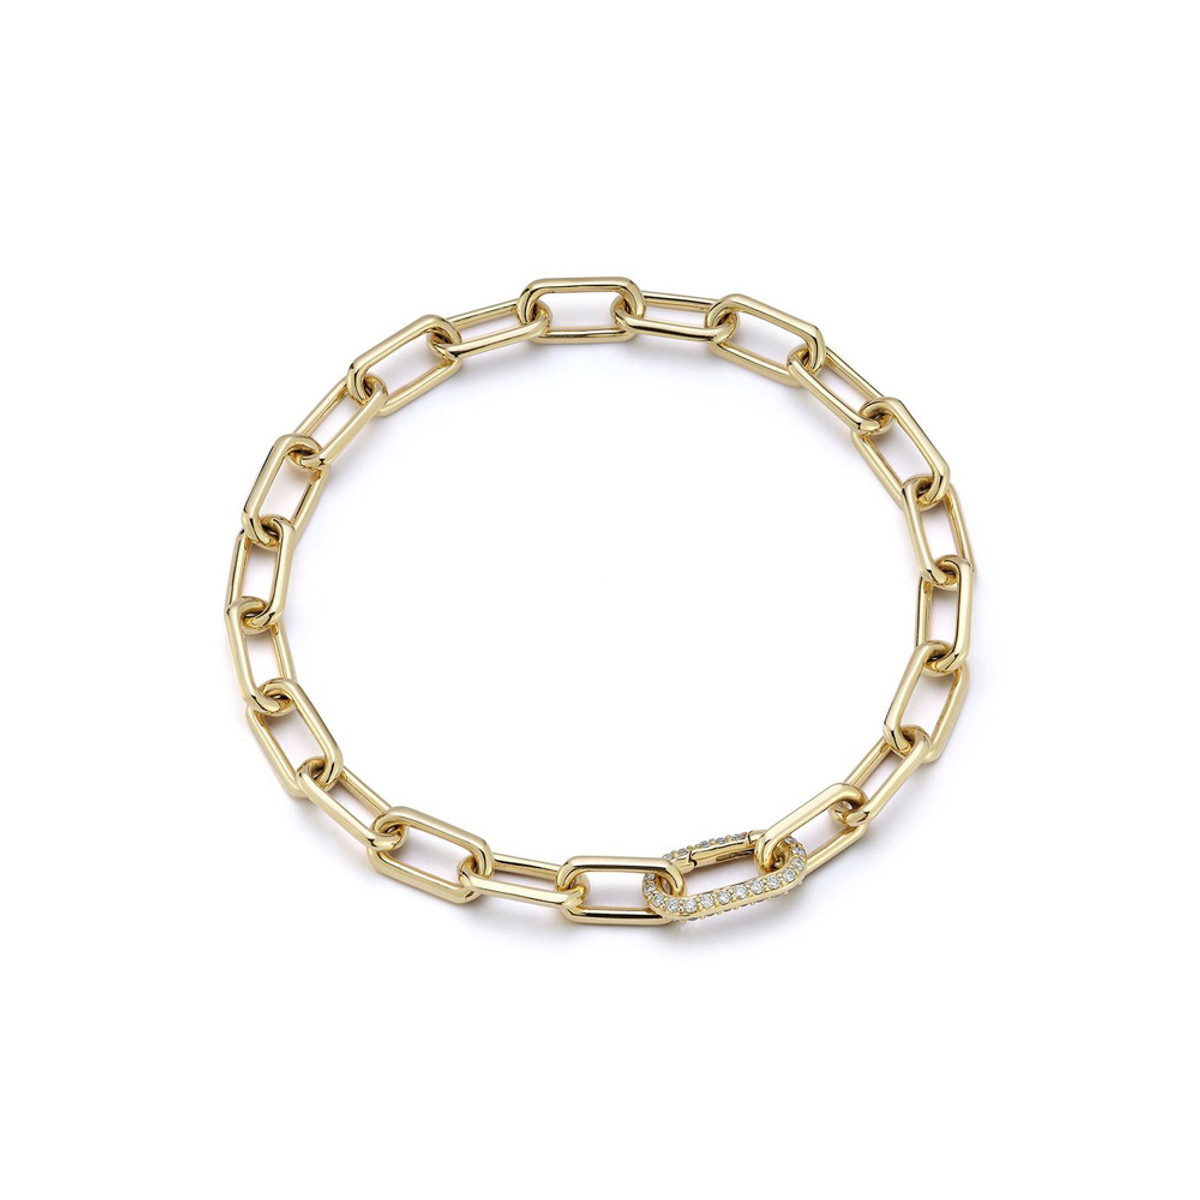 Walters Faith Saxon 18K Yellow Gold Chain Link Bracelet with Diamond Elongated Spring Loaded Clasp-56174